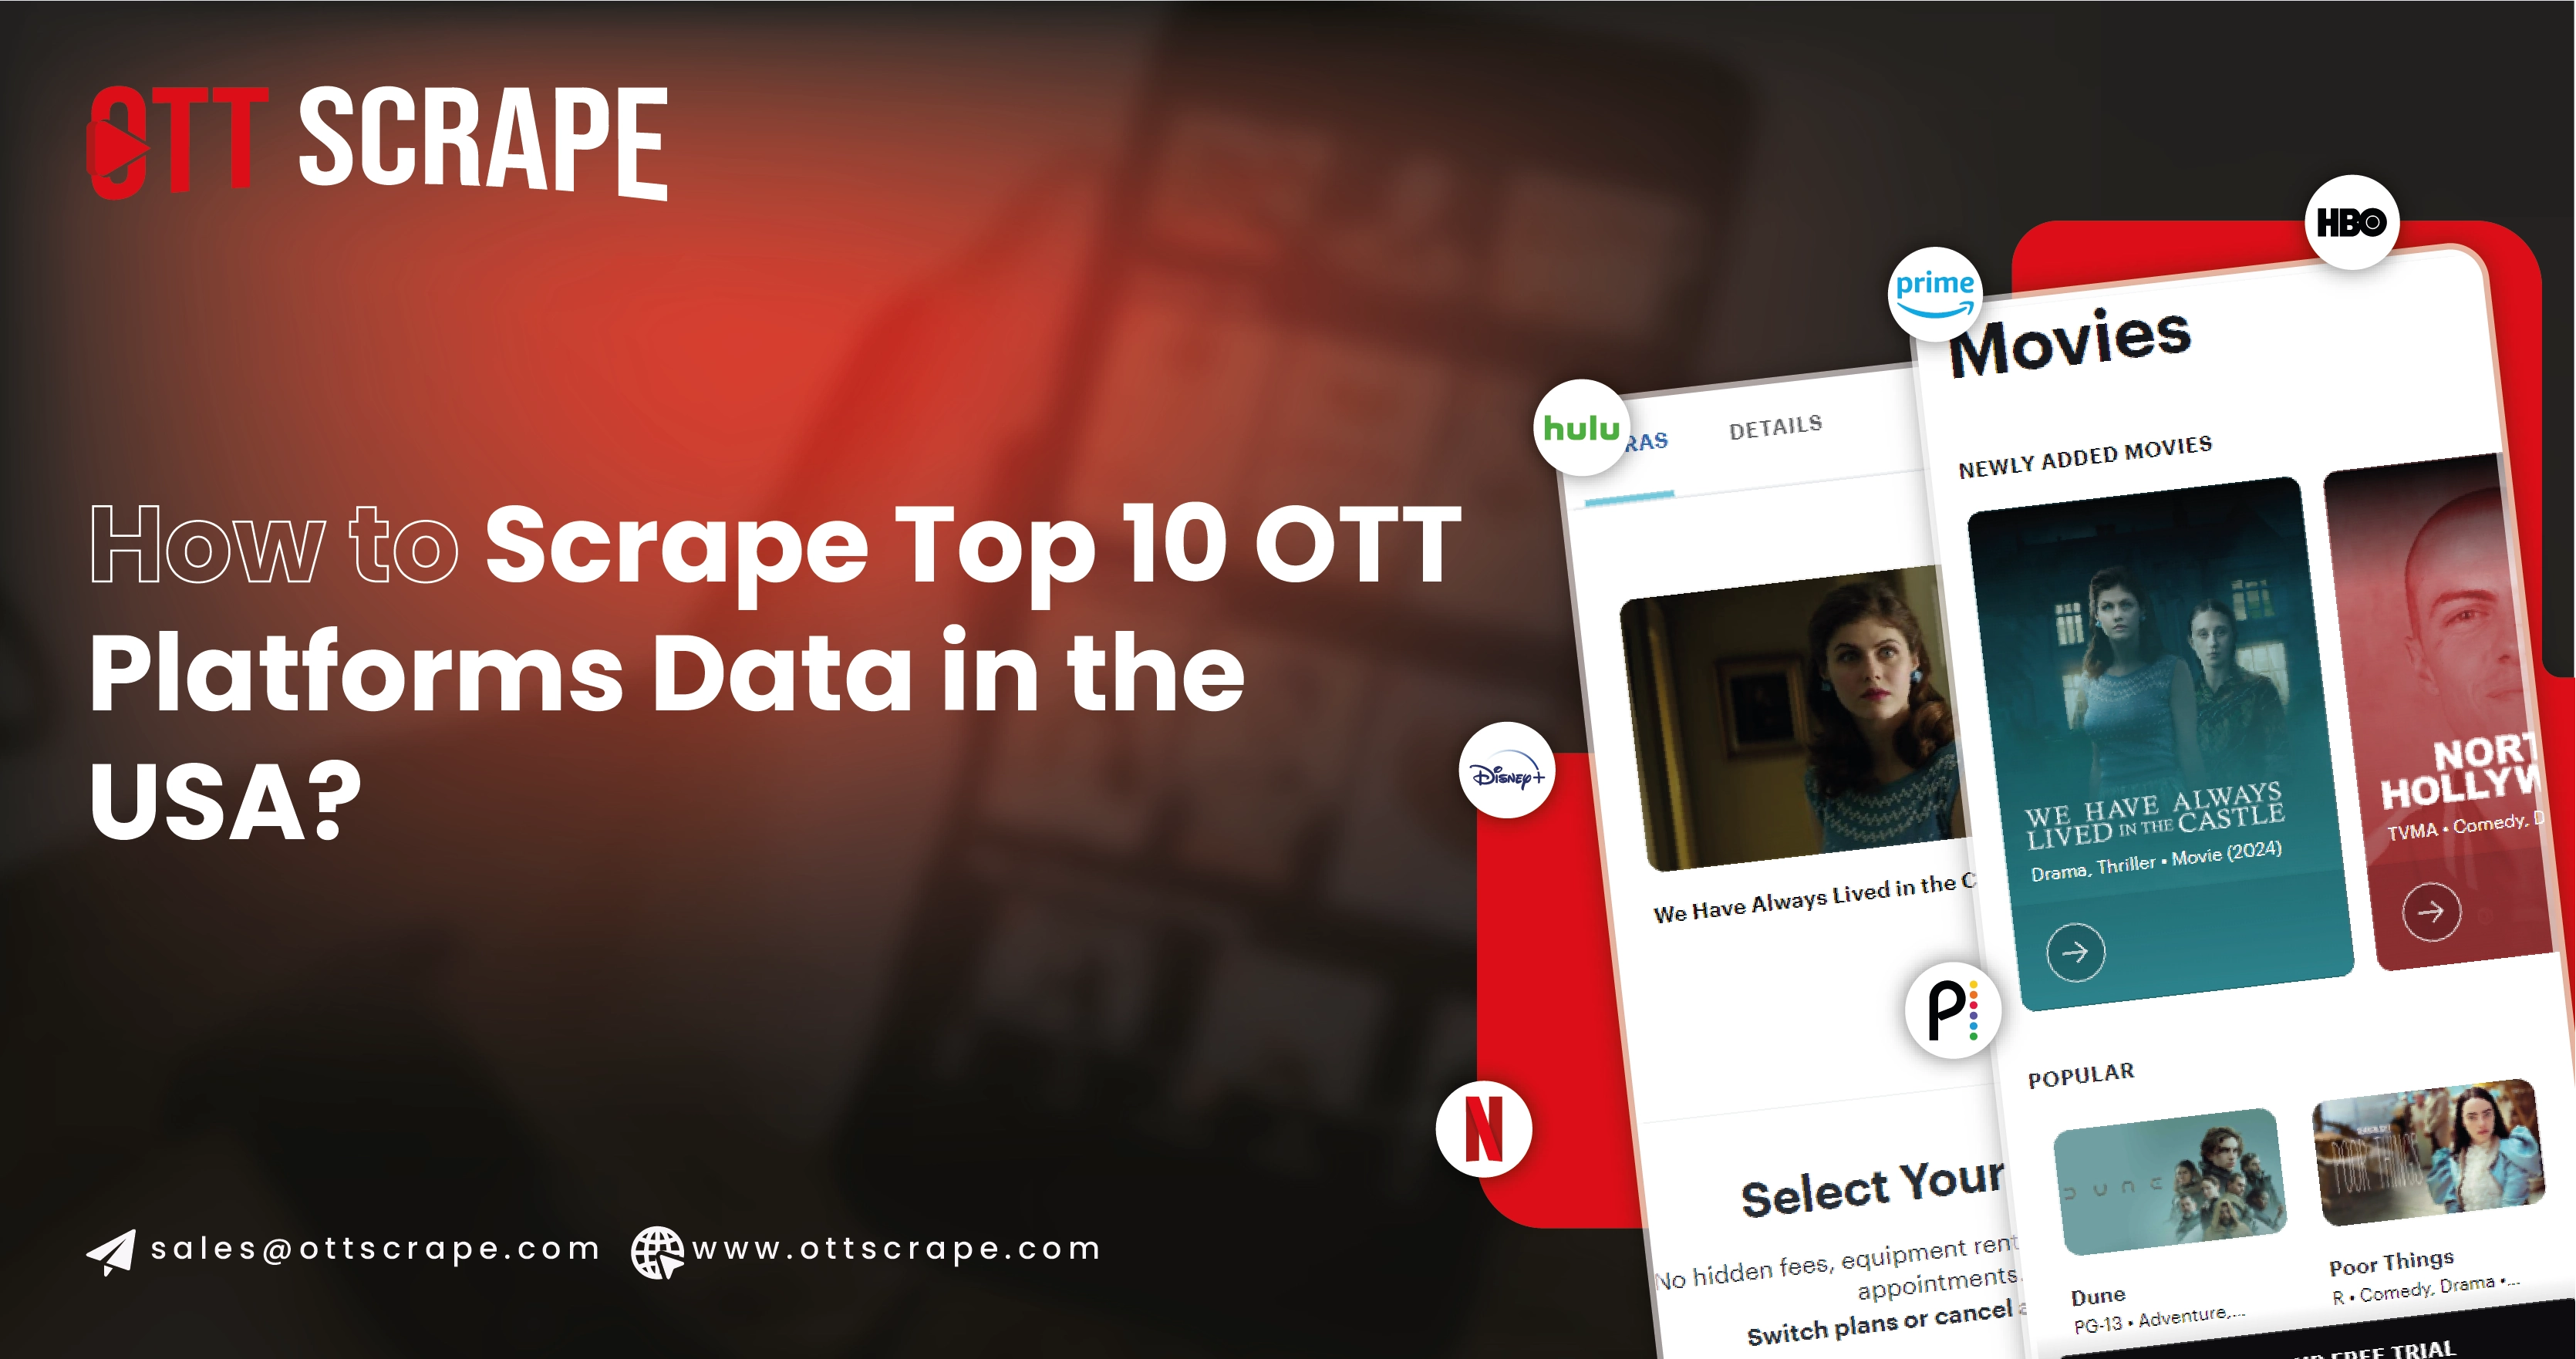 How-to-Scrape-Top-10-OTT-Platforms-Data-in-the-USA